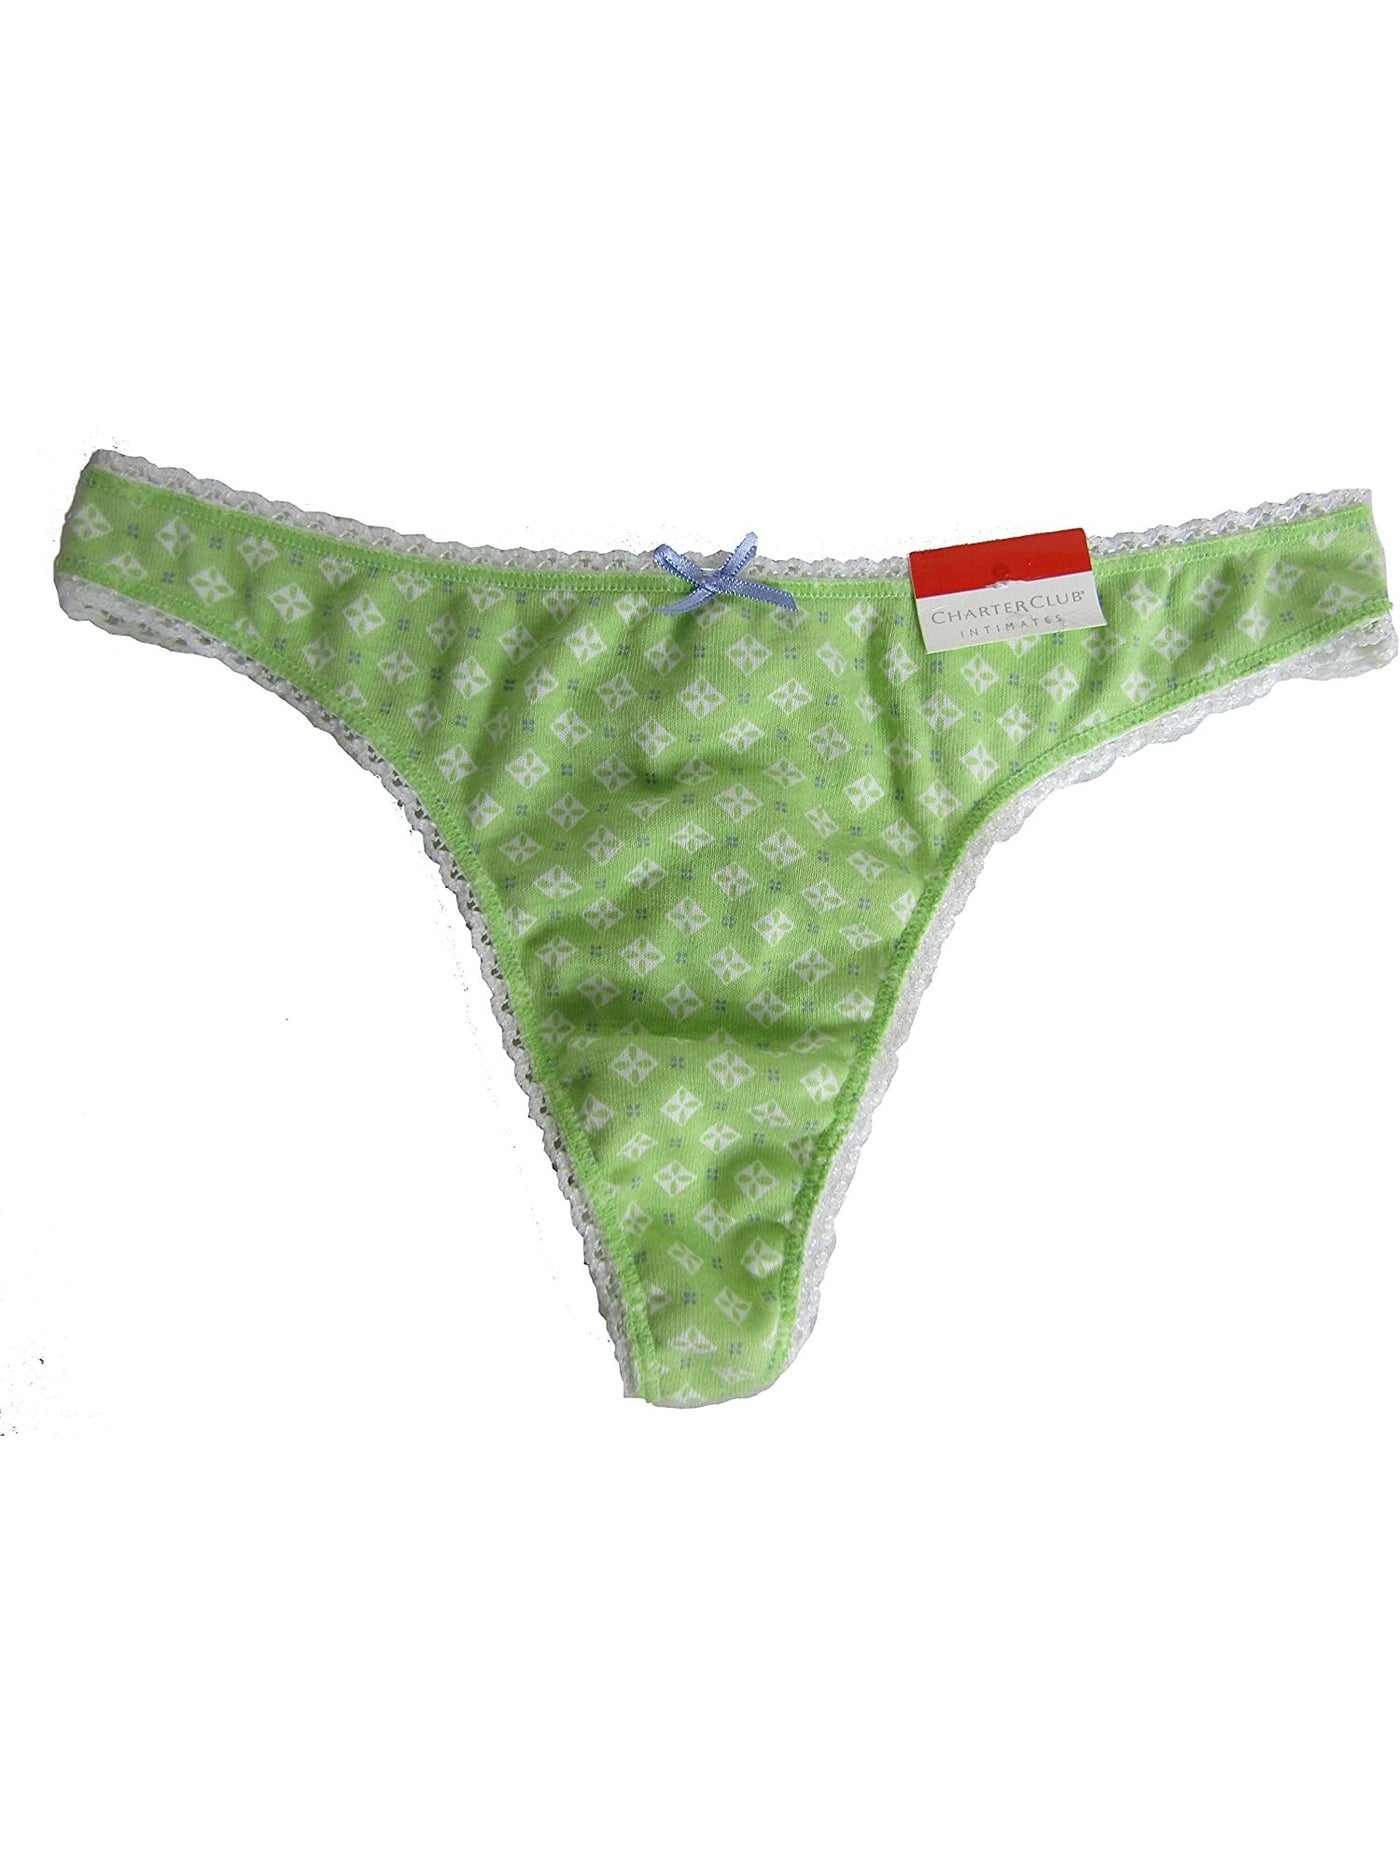 CHARTER CLUB Intimates Green 100% Cotton Everyday Thong Size: S